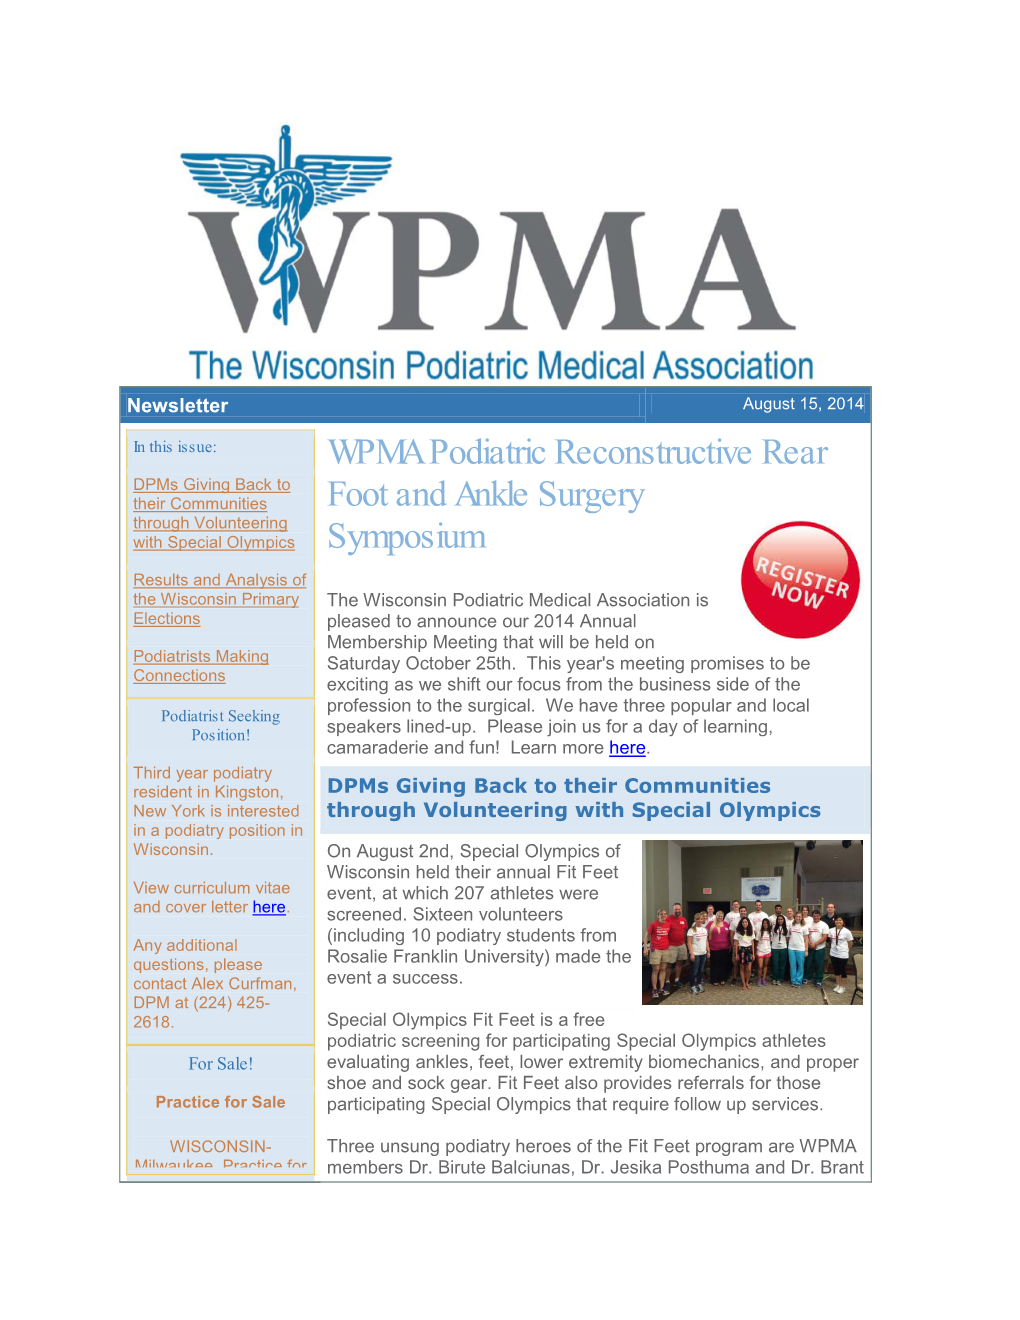 WPMA Podiatric Reconstructive Rear Foot and Ankle Surgery Symposium